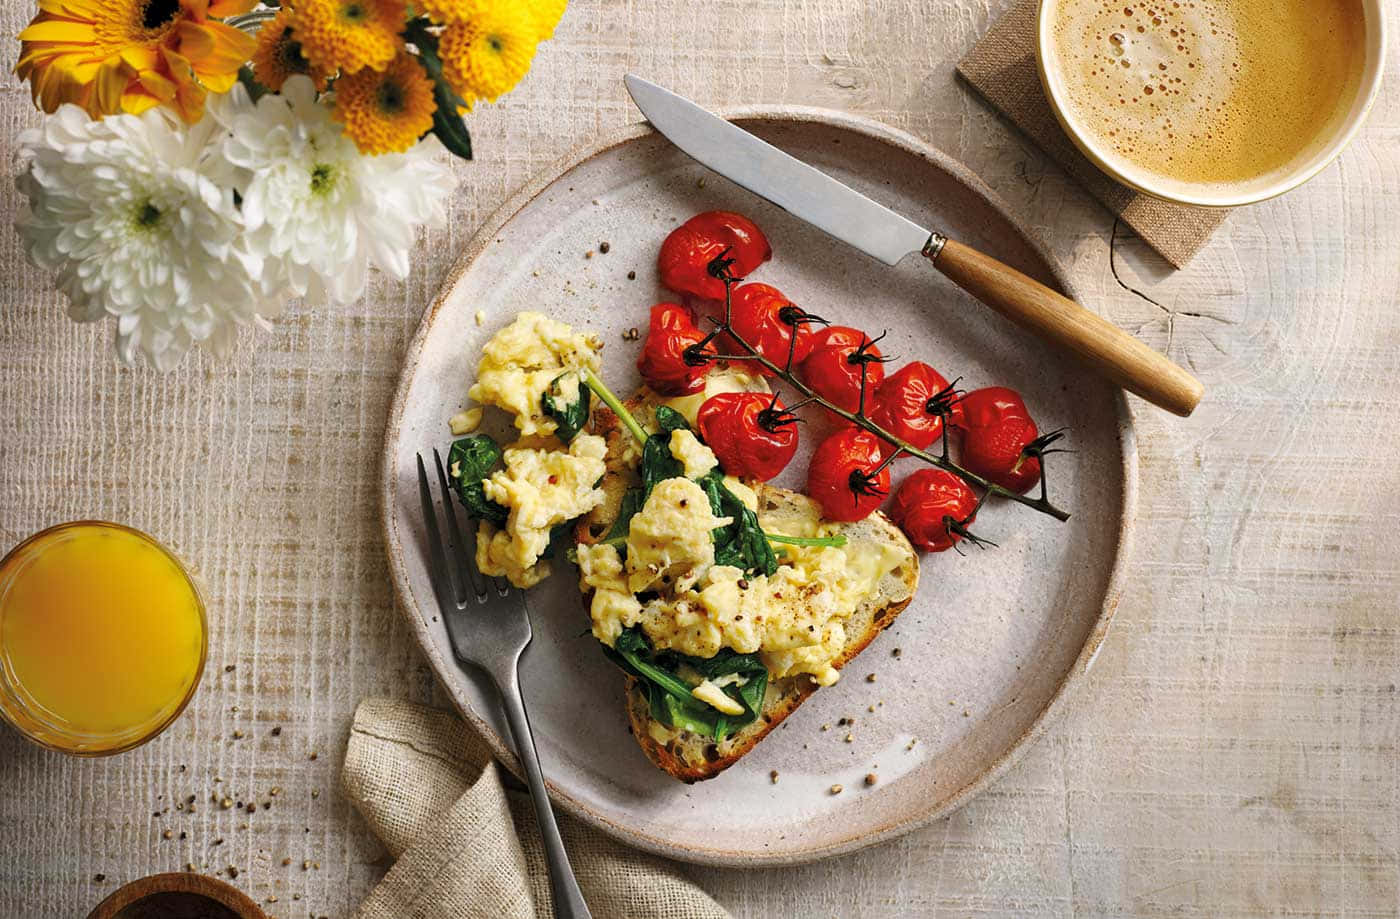 Deliciously scrambled eggs with just the right amount of salt.